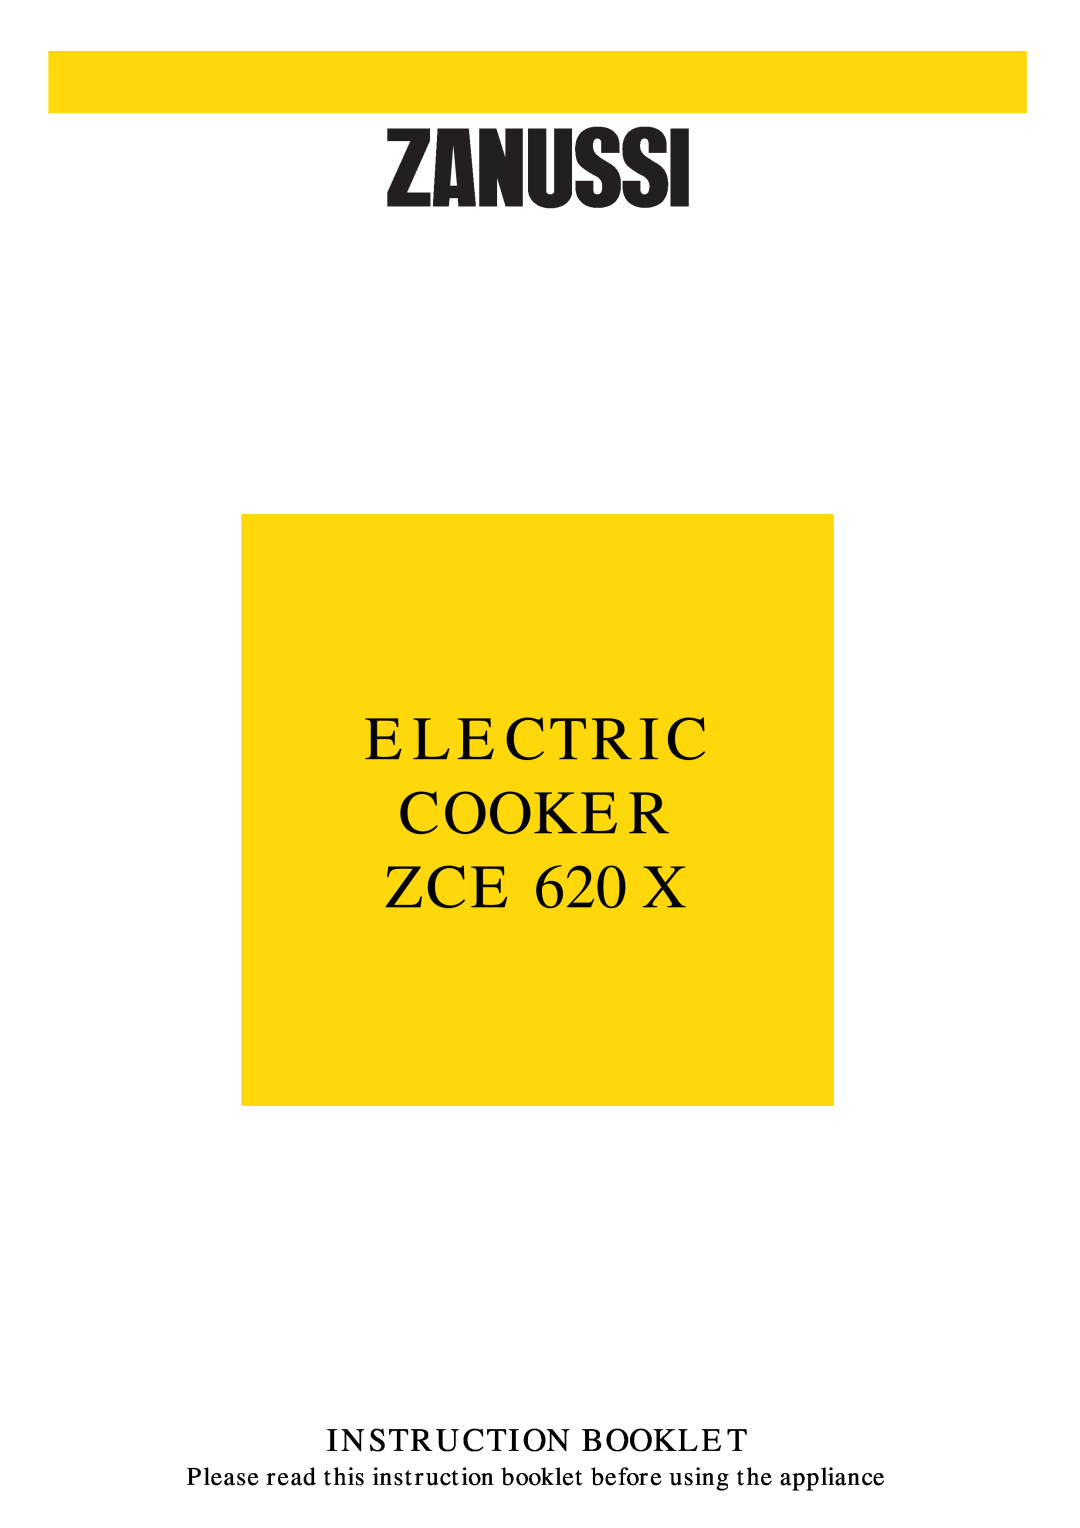 Zanussi ZCE 620 X manual Electric Cooker Zce, Instruction Booklet 